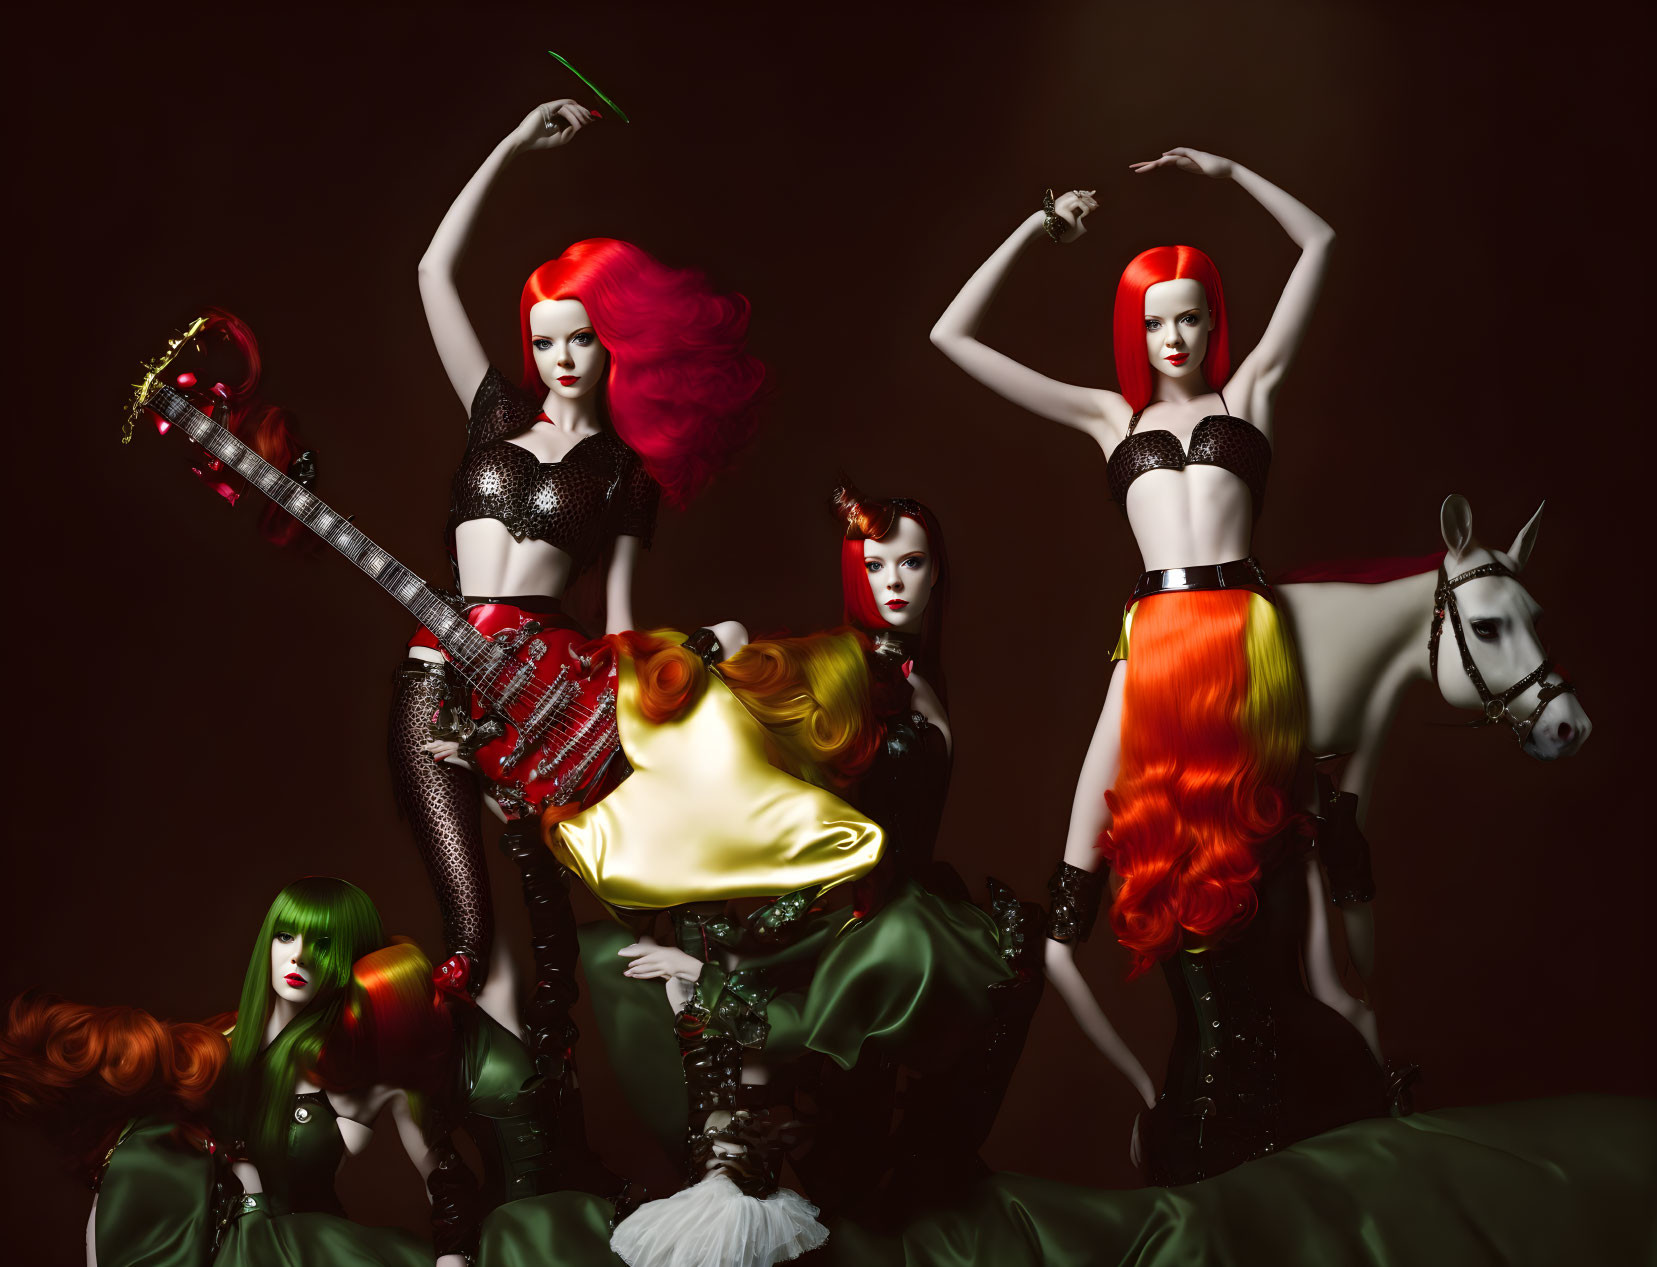 Vibrant photo of four stylized female figures with colorful hair and bold makeup, posing with a